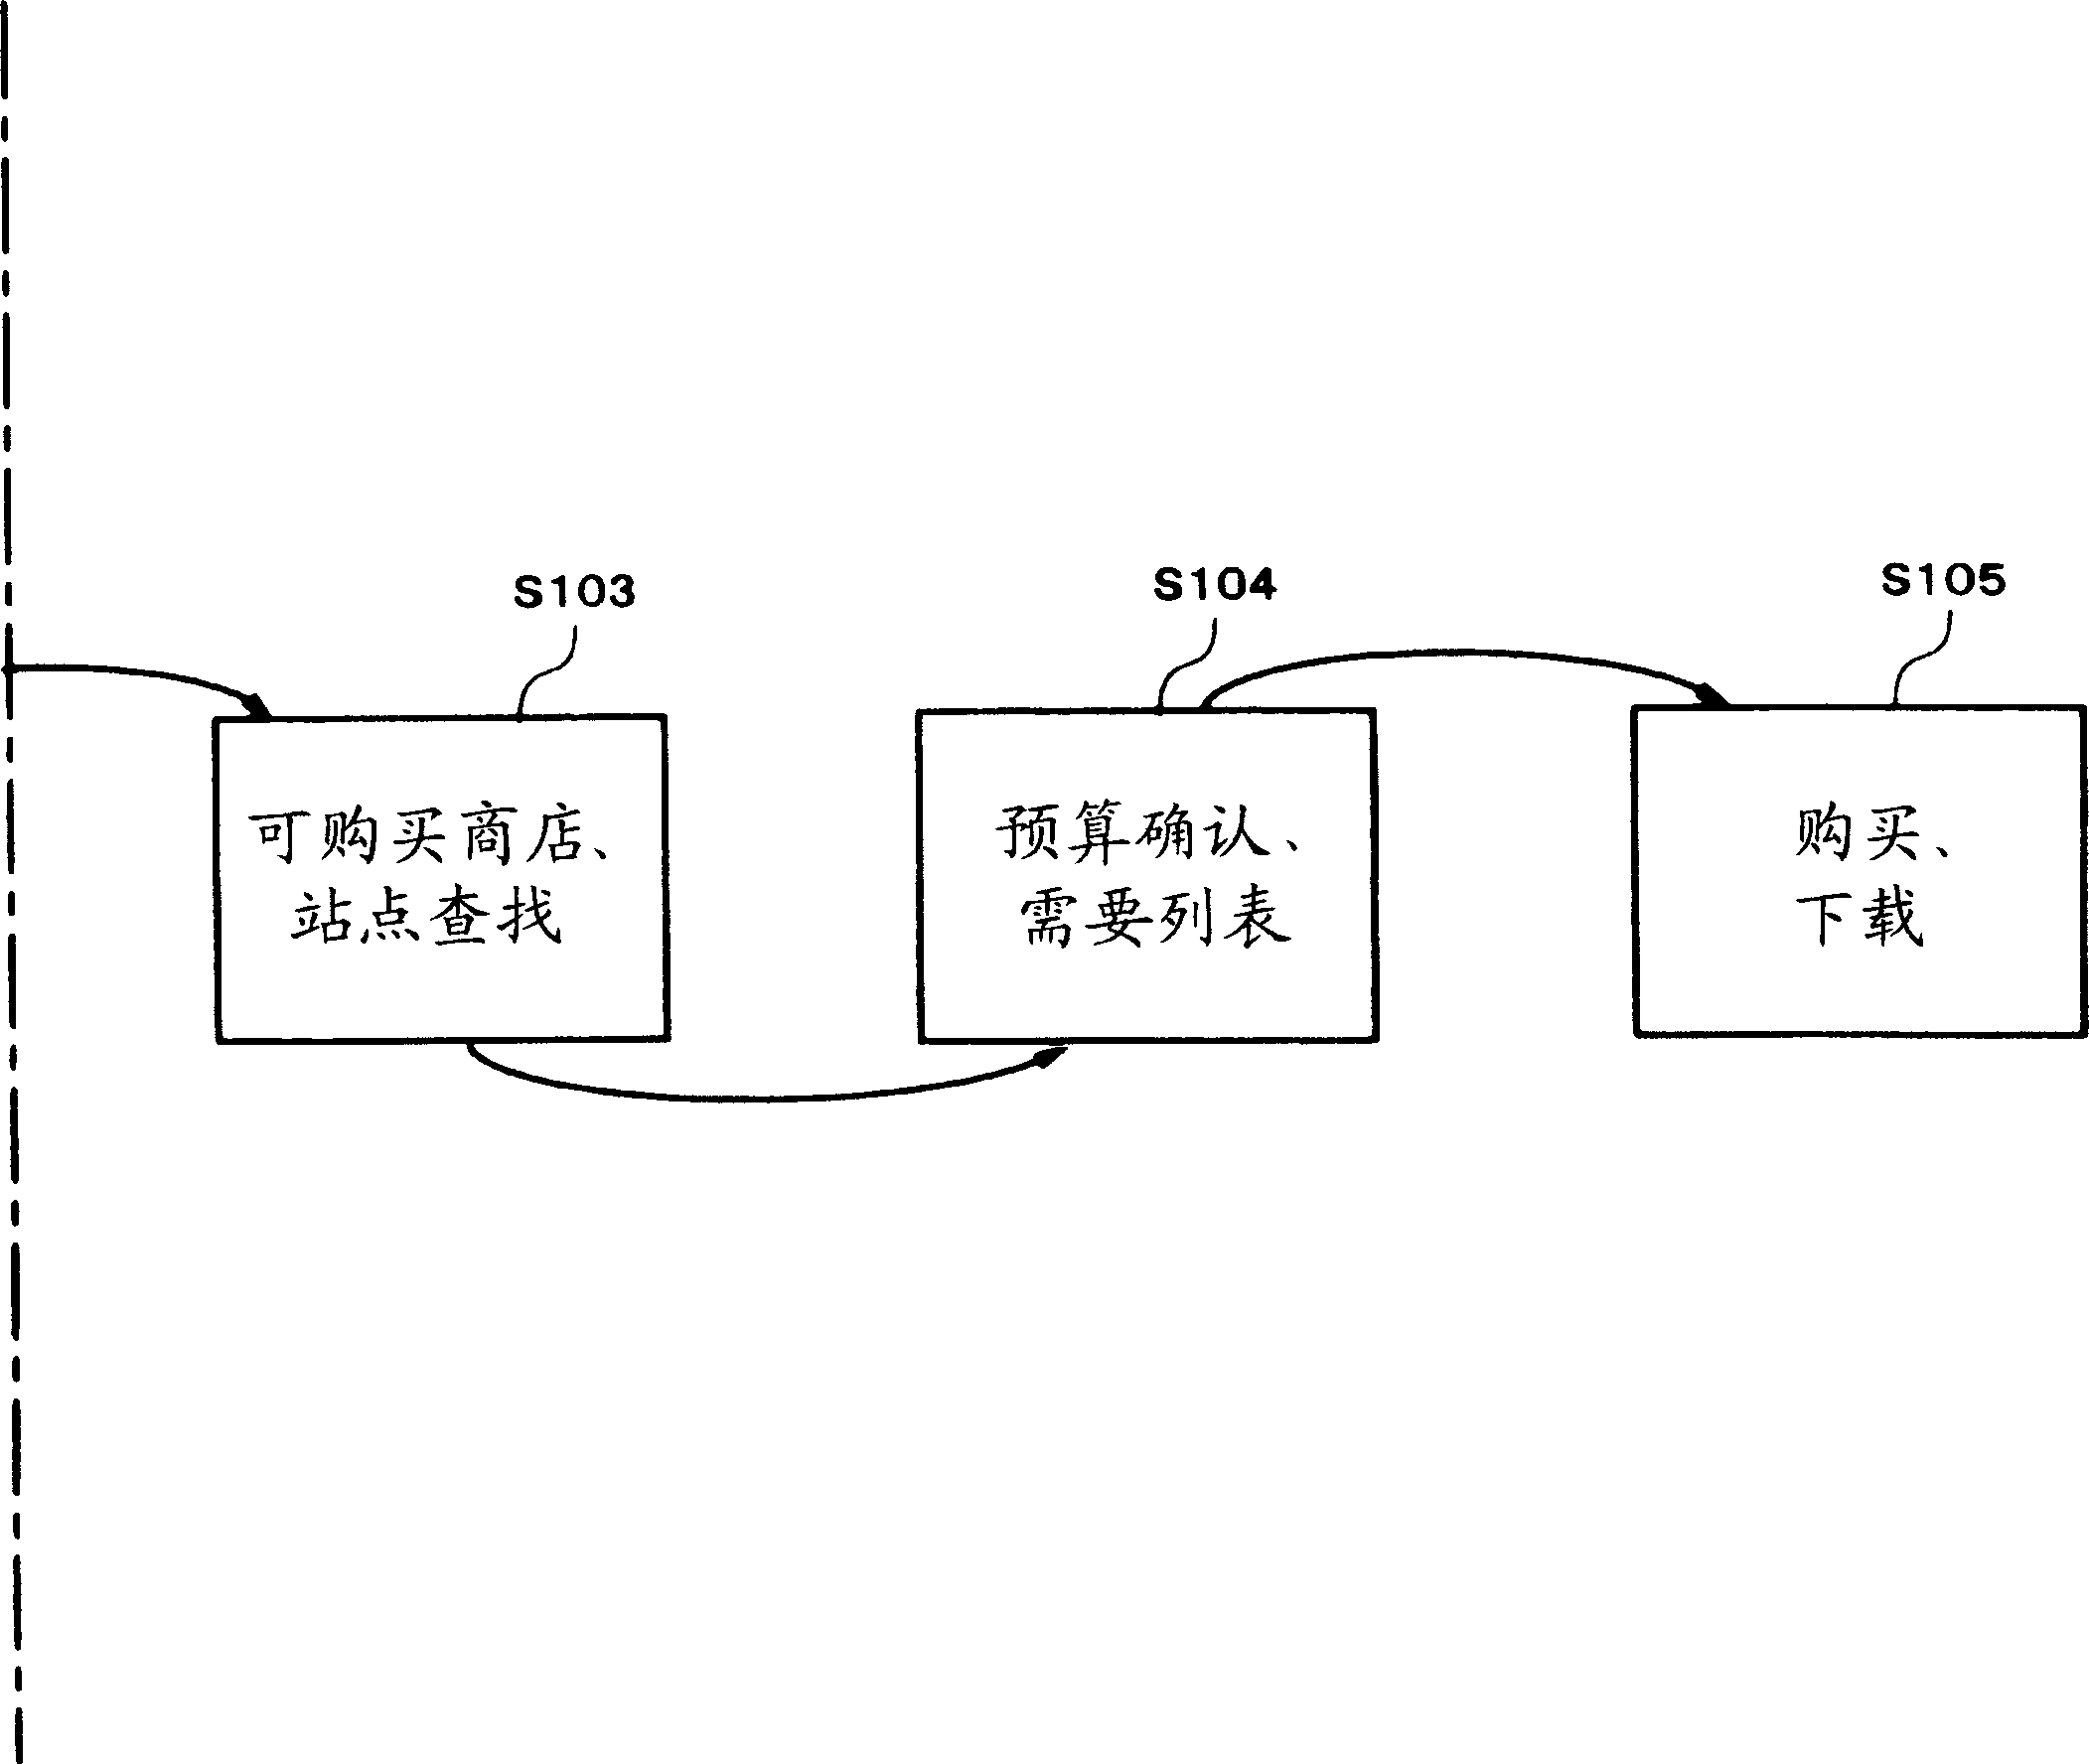 Information search system, information search method, information search device, information search program, image recognition device, image recognition method, image recognition program, and sales sy